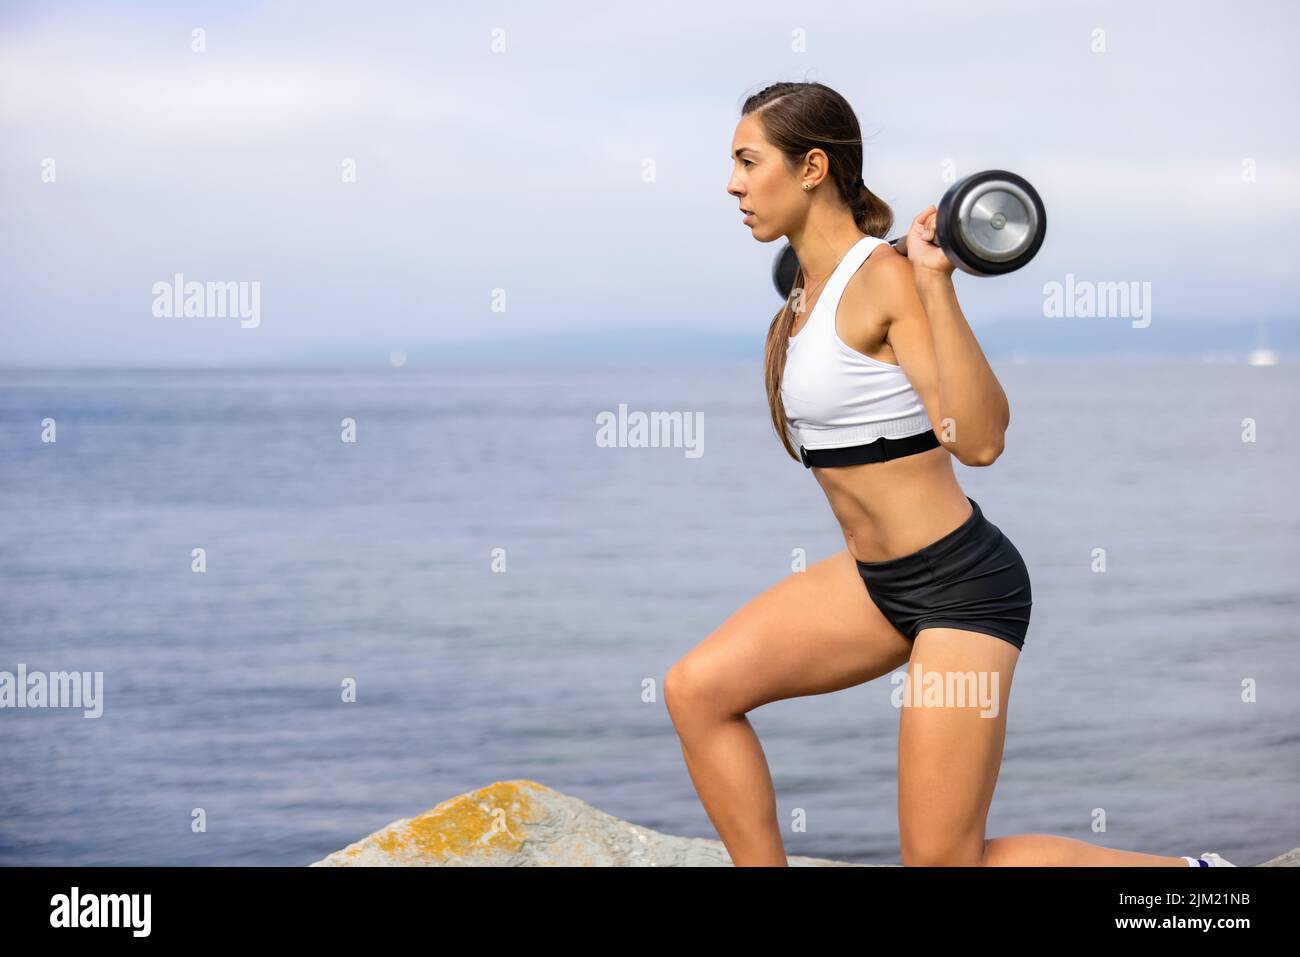 Confident Athlete Exercising With Barbell During Outdoor Workout Stock Photo